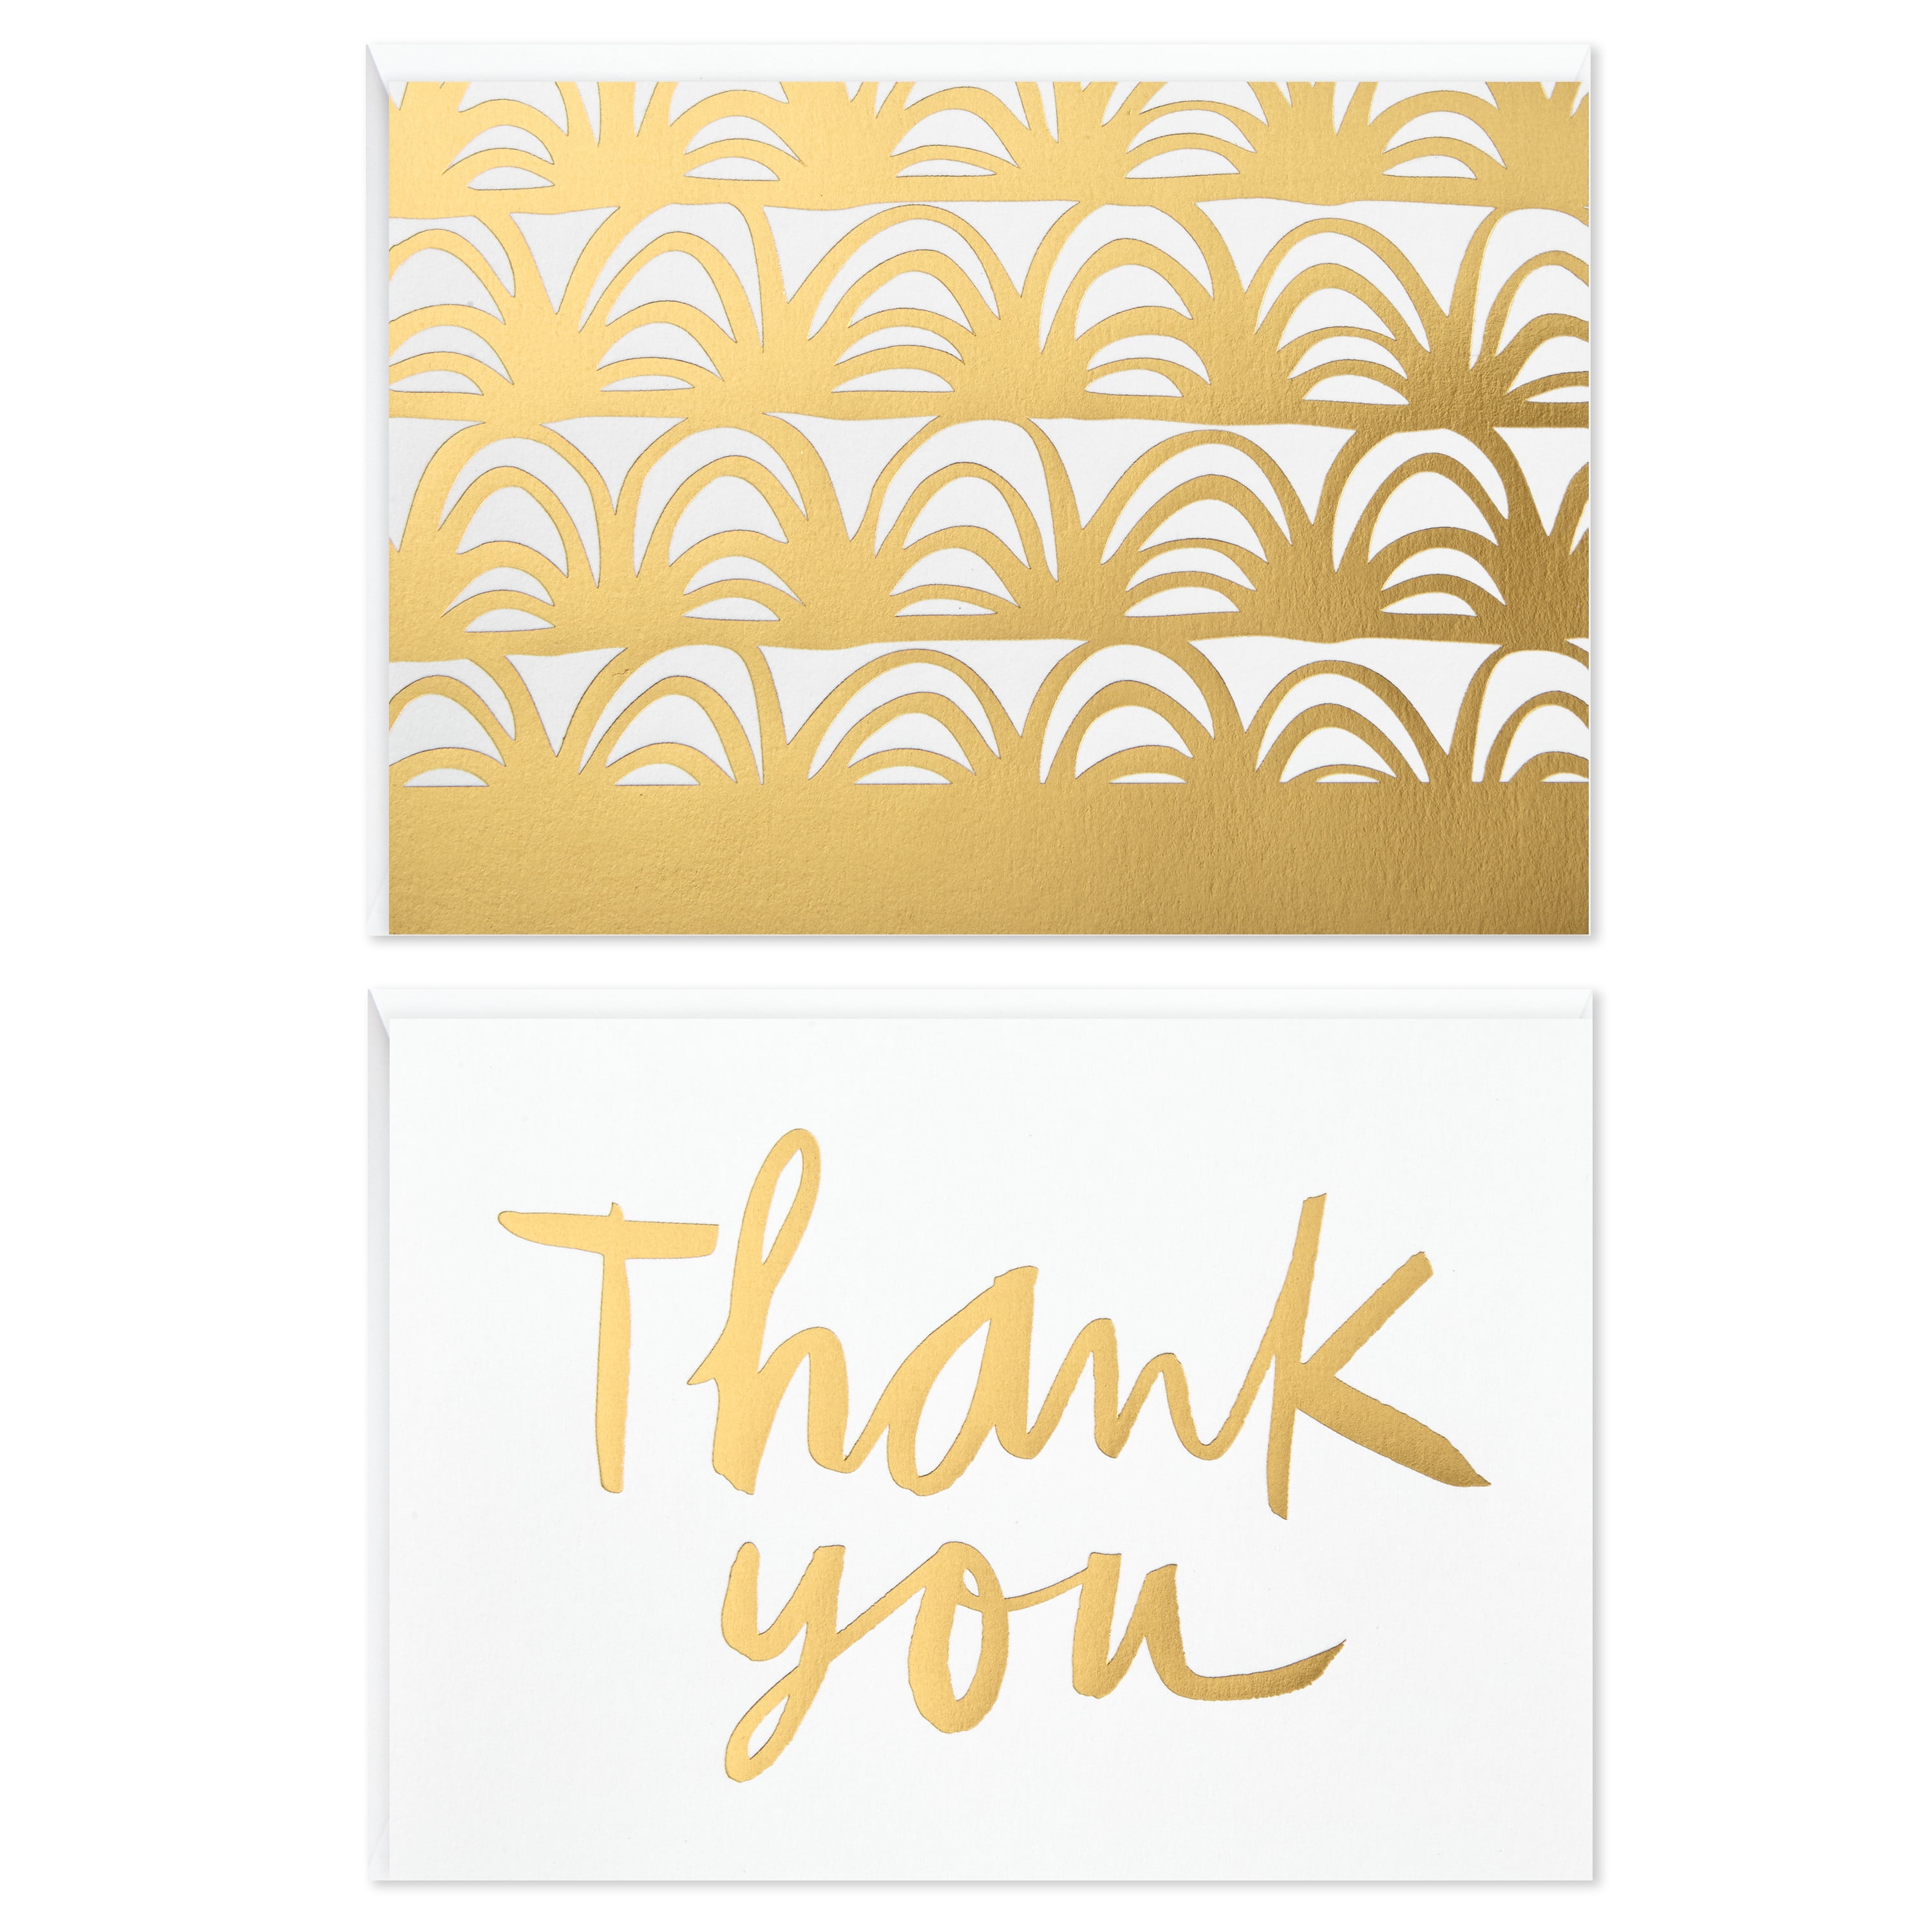 Hallmark Expressions Thank You Cards Pack of 8 